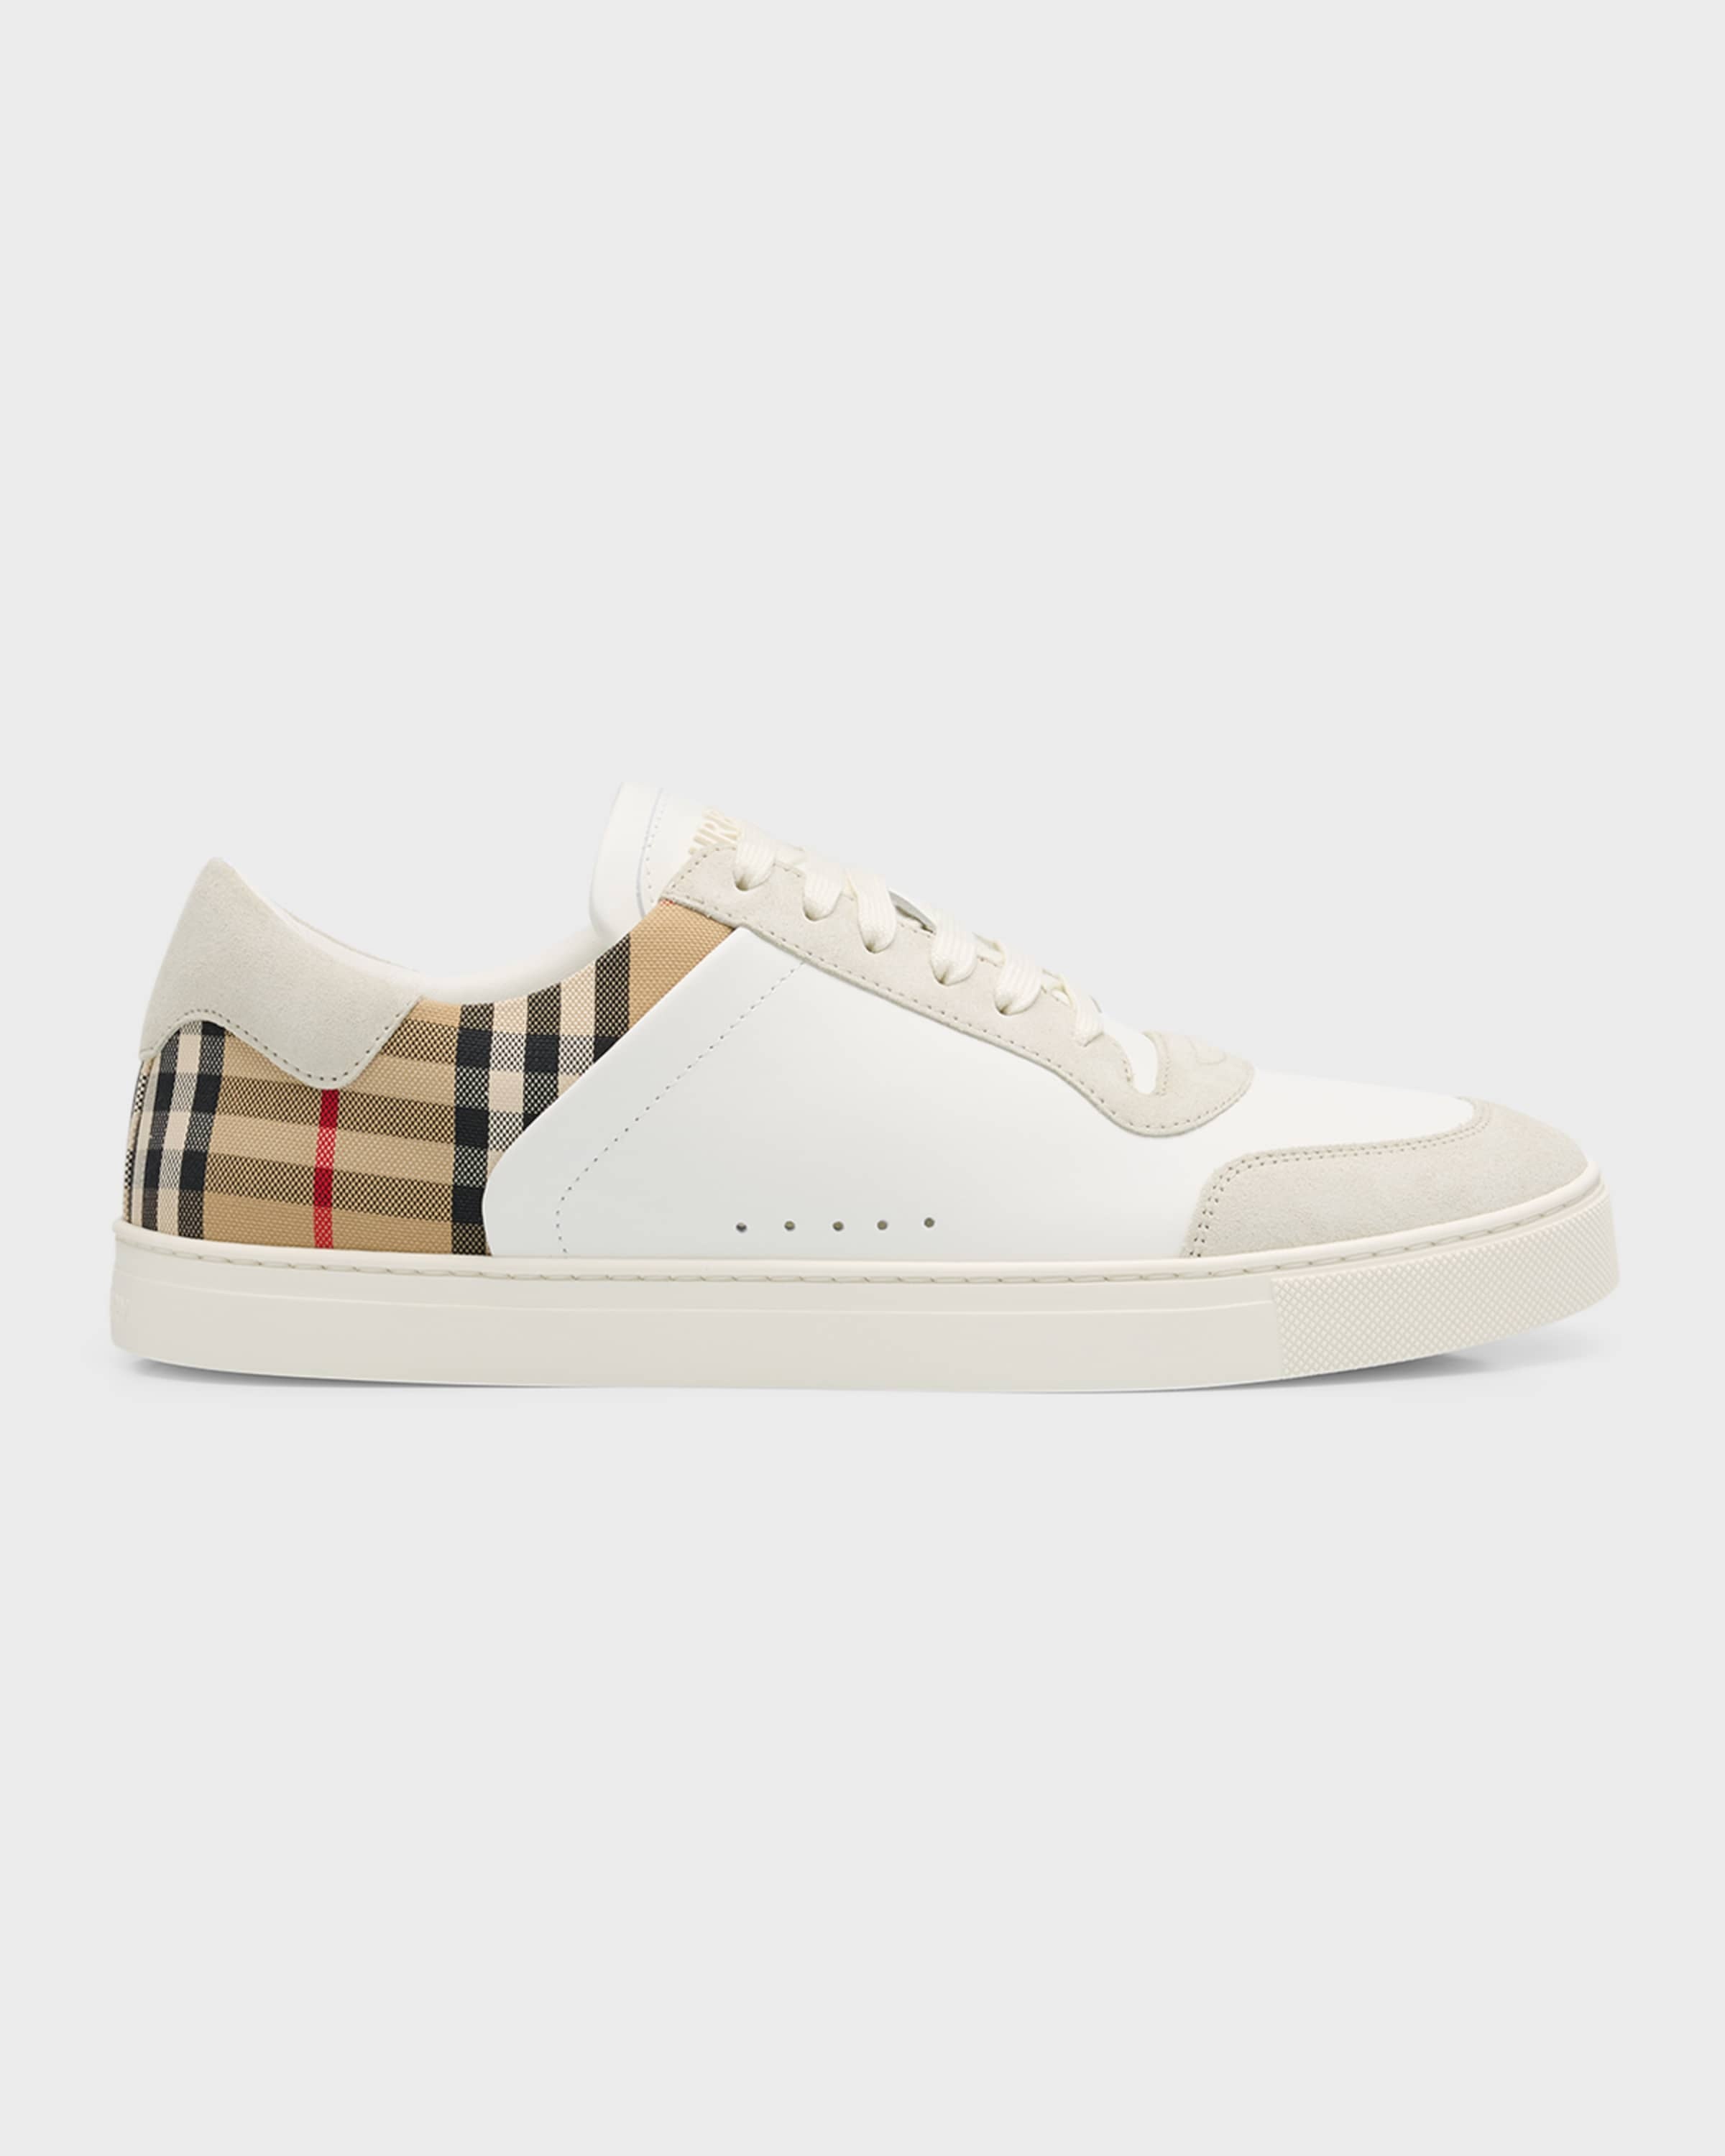 Men's Leather-Suede Check Sneakers - 1